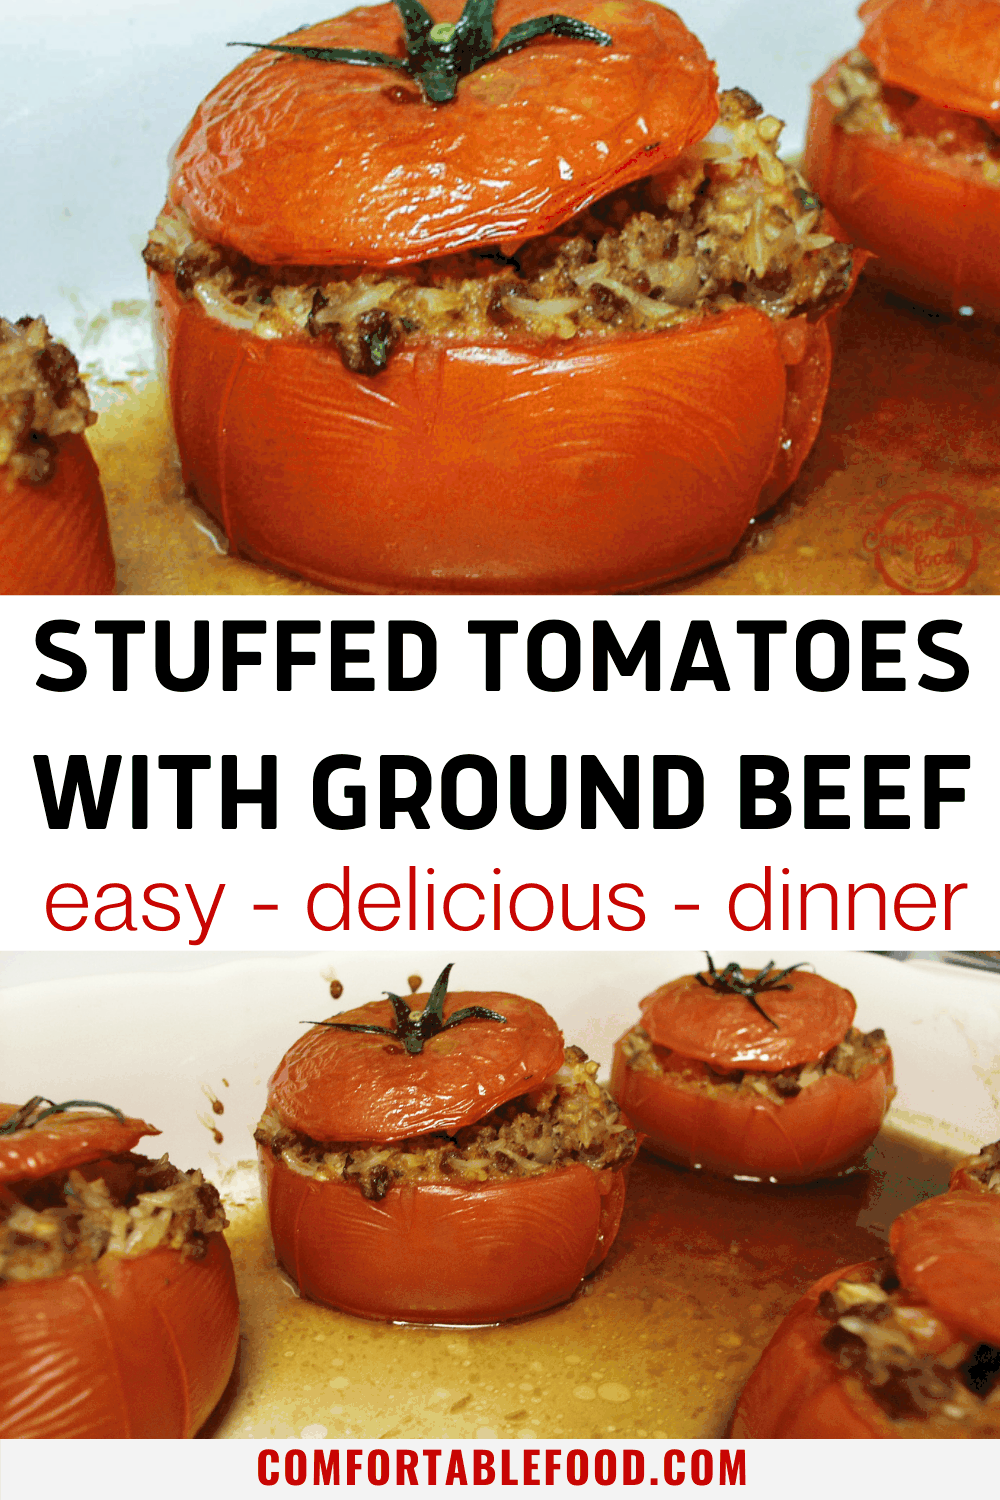 Juicy stuffed tomatoes with ground beef and rice in a pan